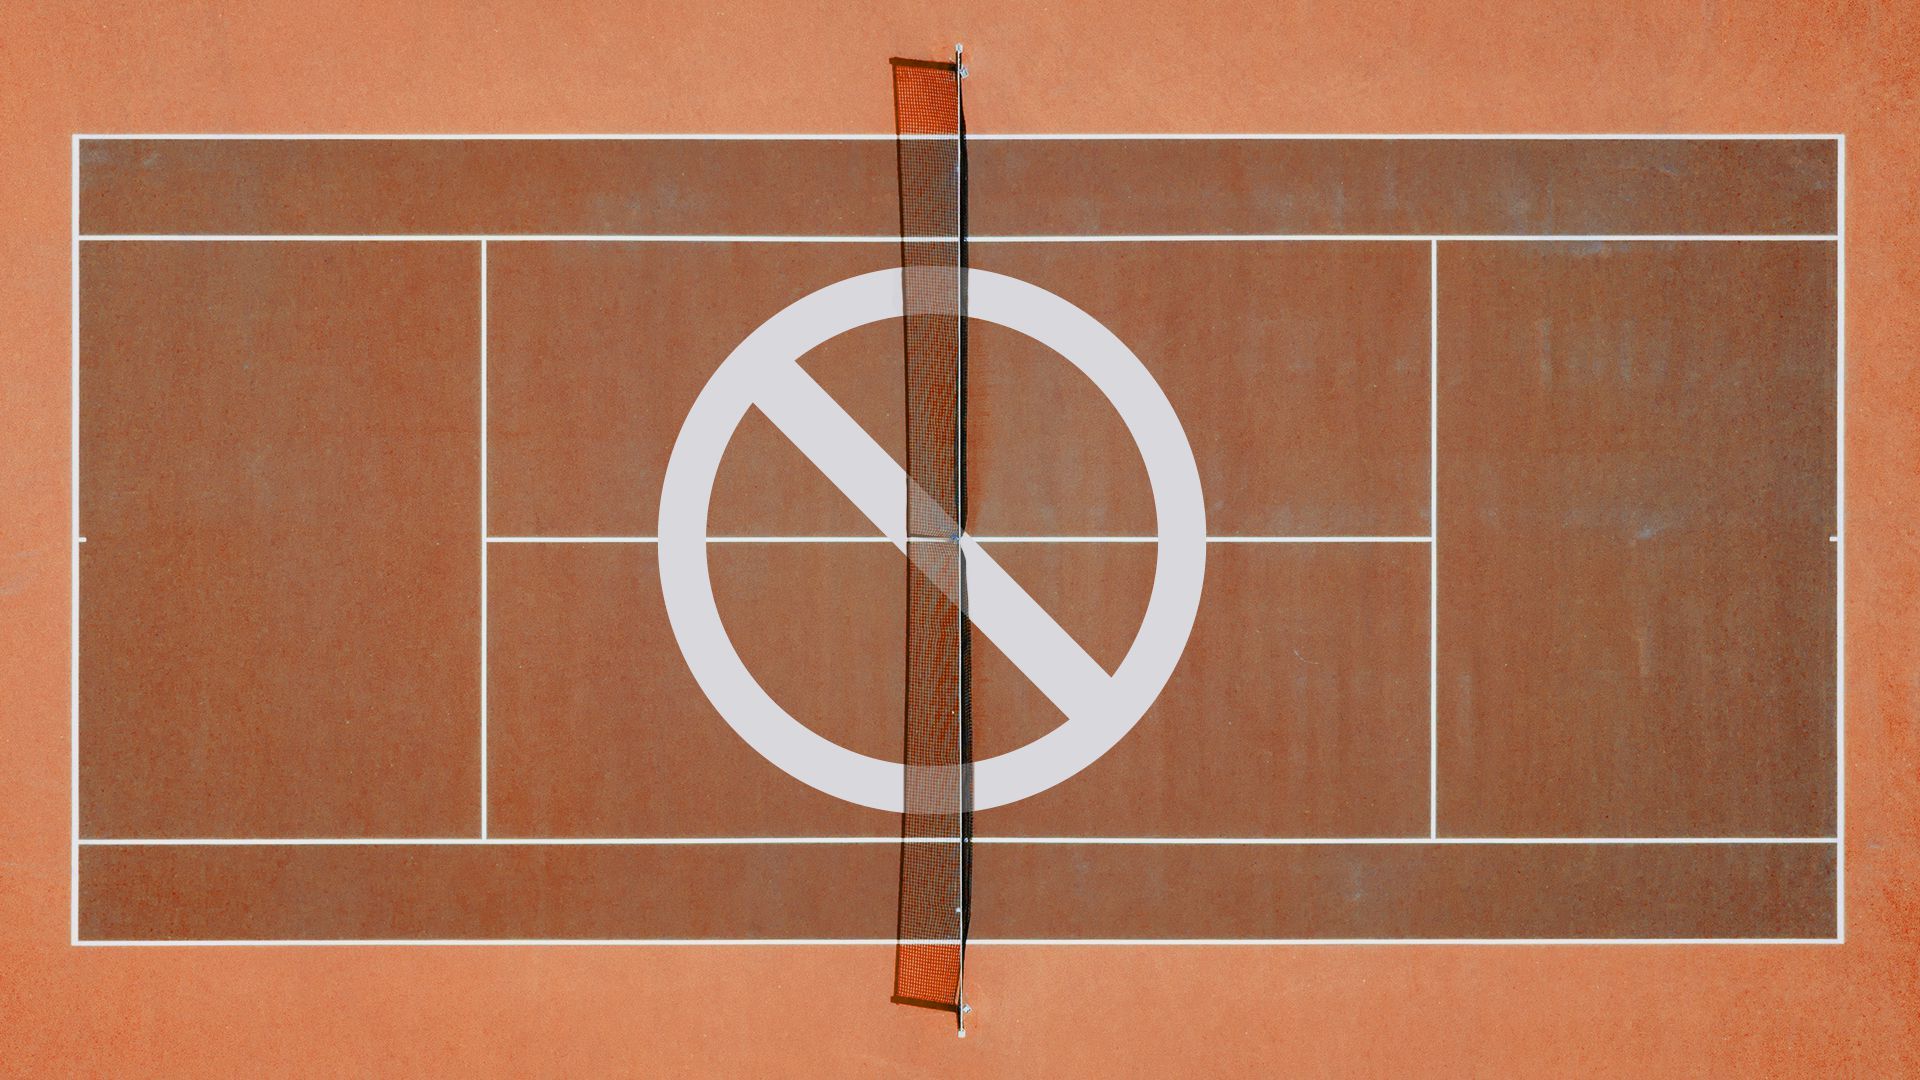 Illustration of a tennis court with a “no” symbol